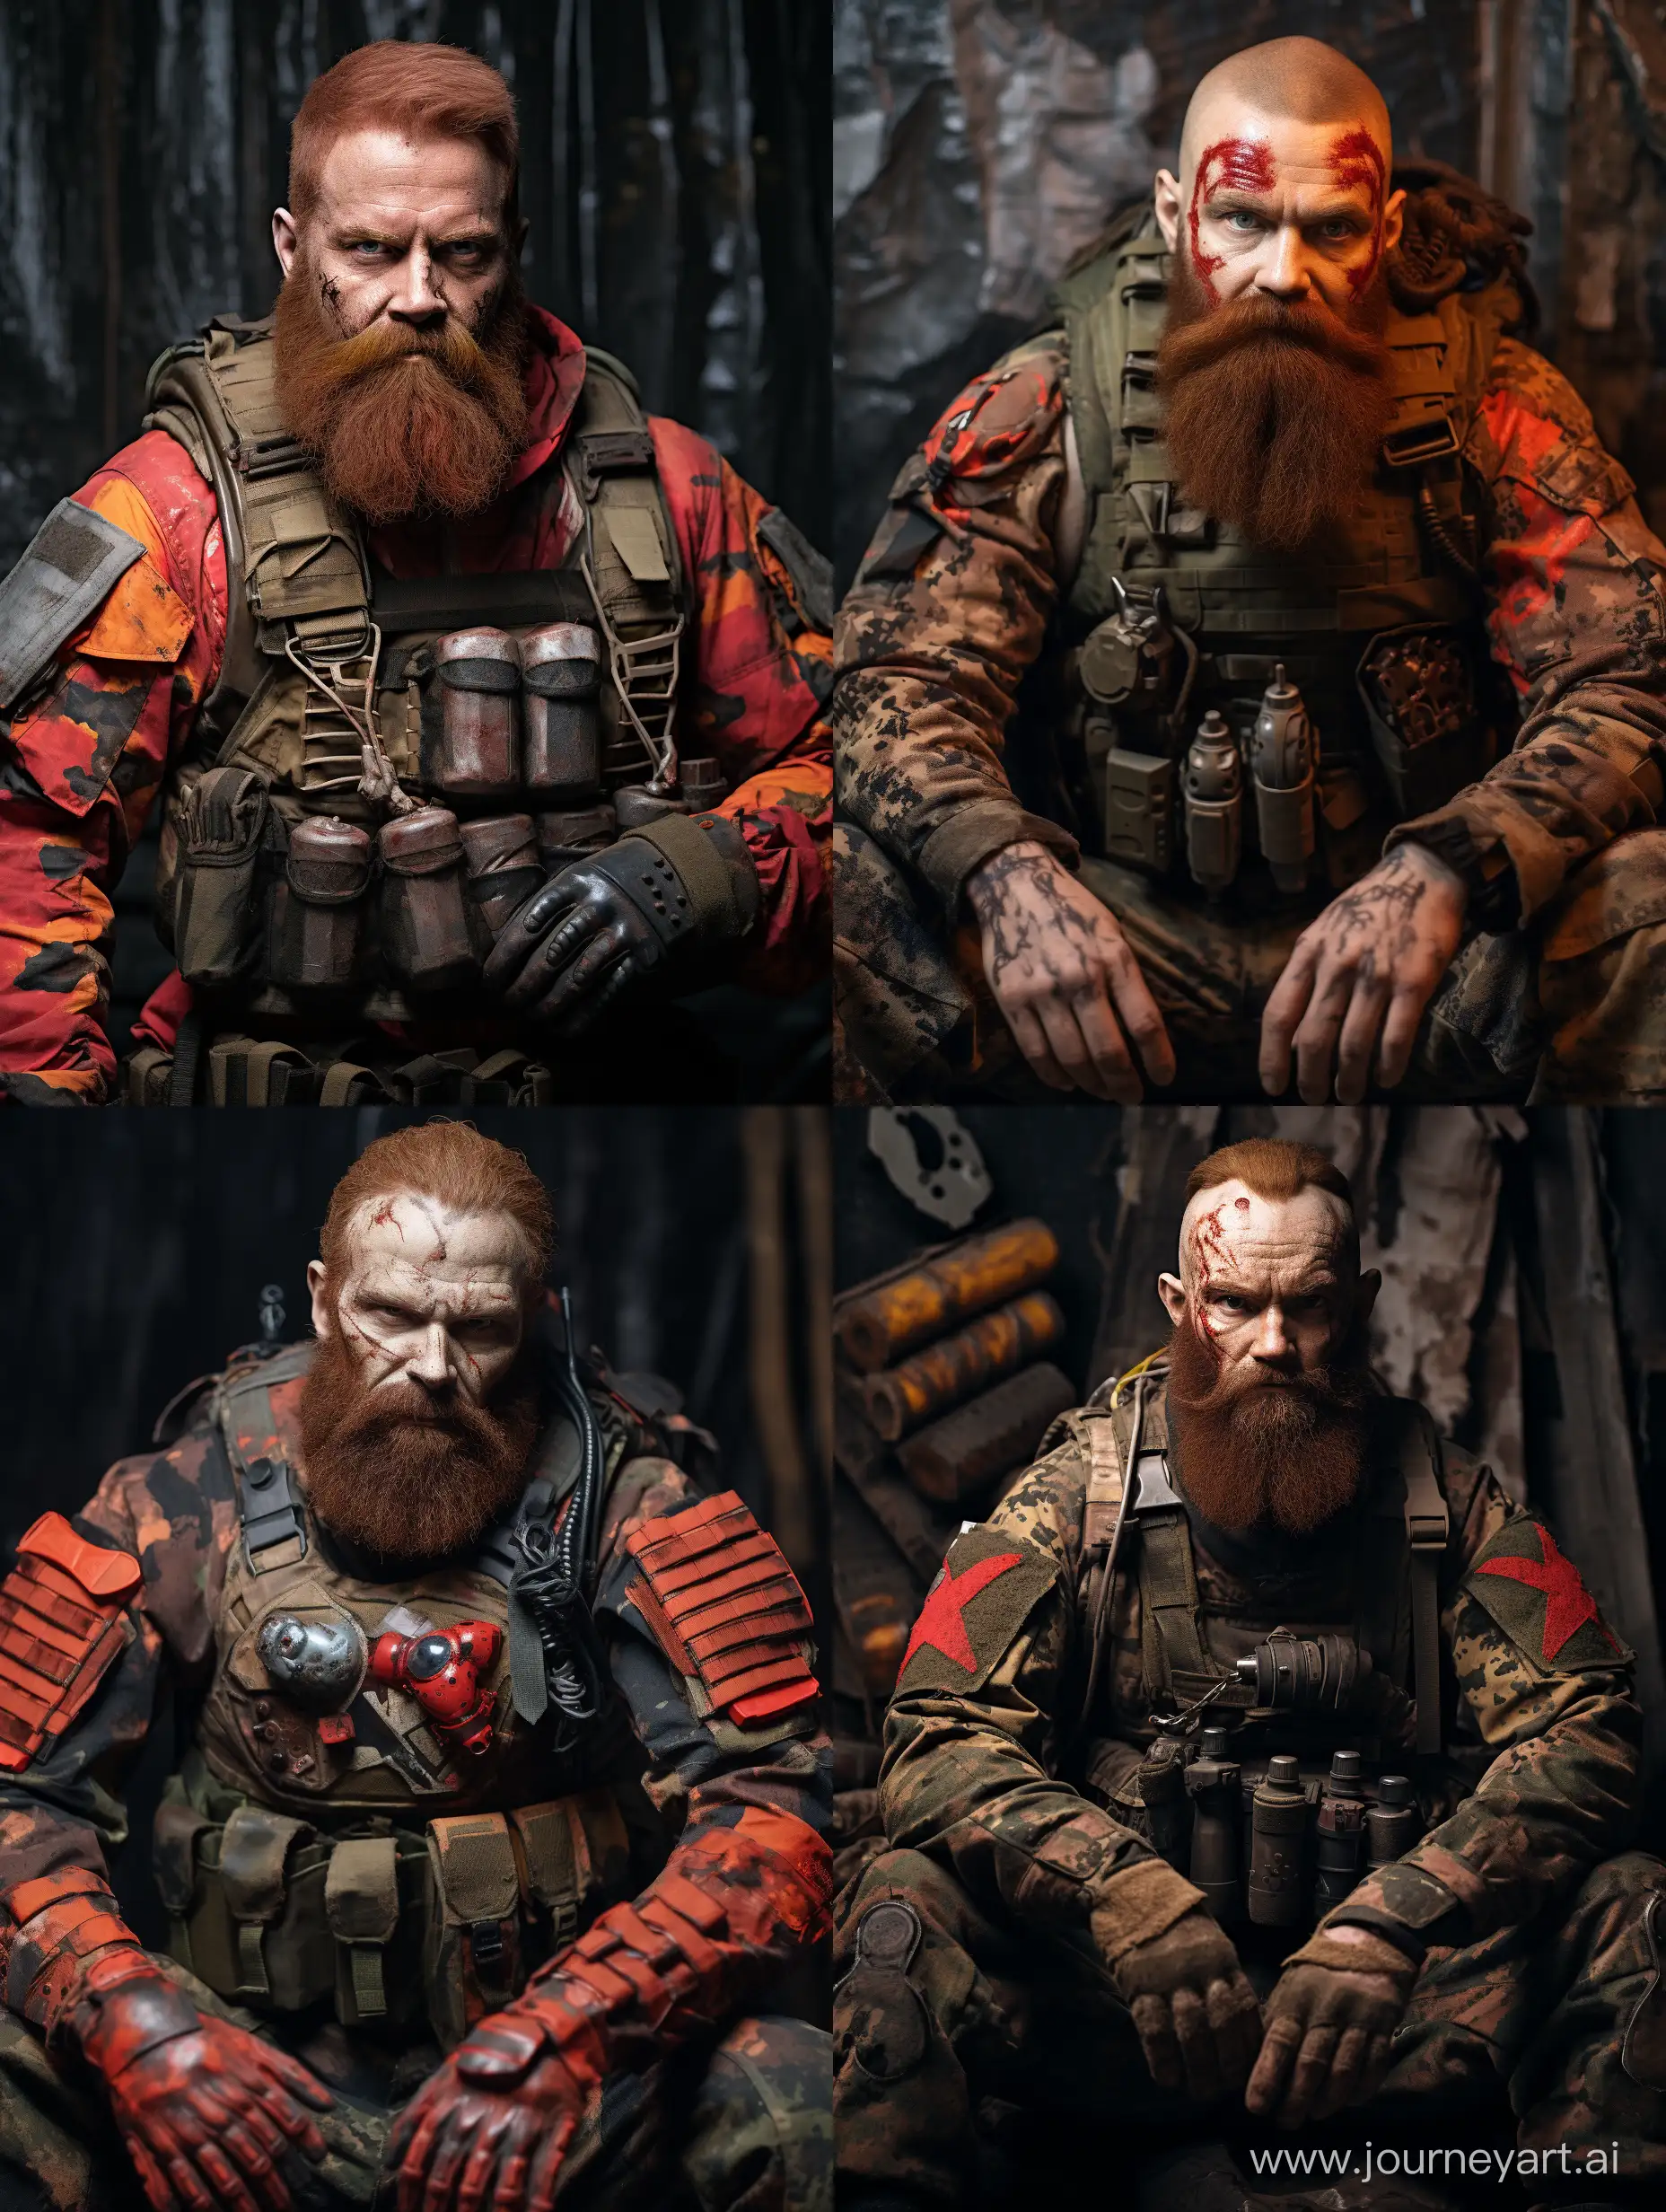 human in Tropentarn red army uniform, atomic heart man 45-year-old with red beard, full body, Tropentarn camouflage tight, Photos 8K, highly detailed, post-apocalypse Sci-fi uniform, solo, no weapon